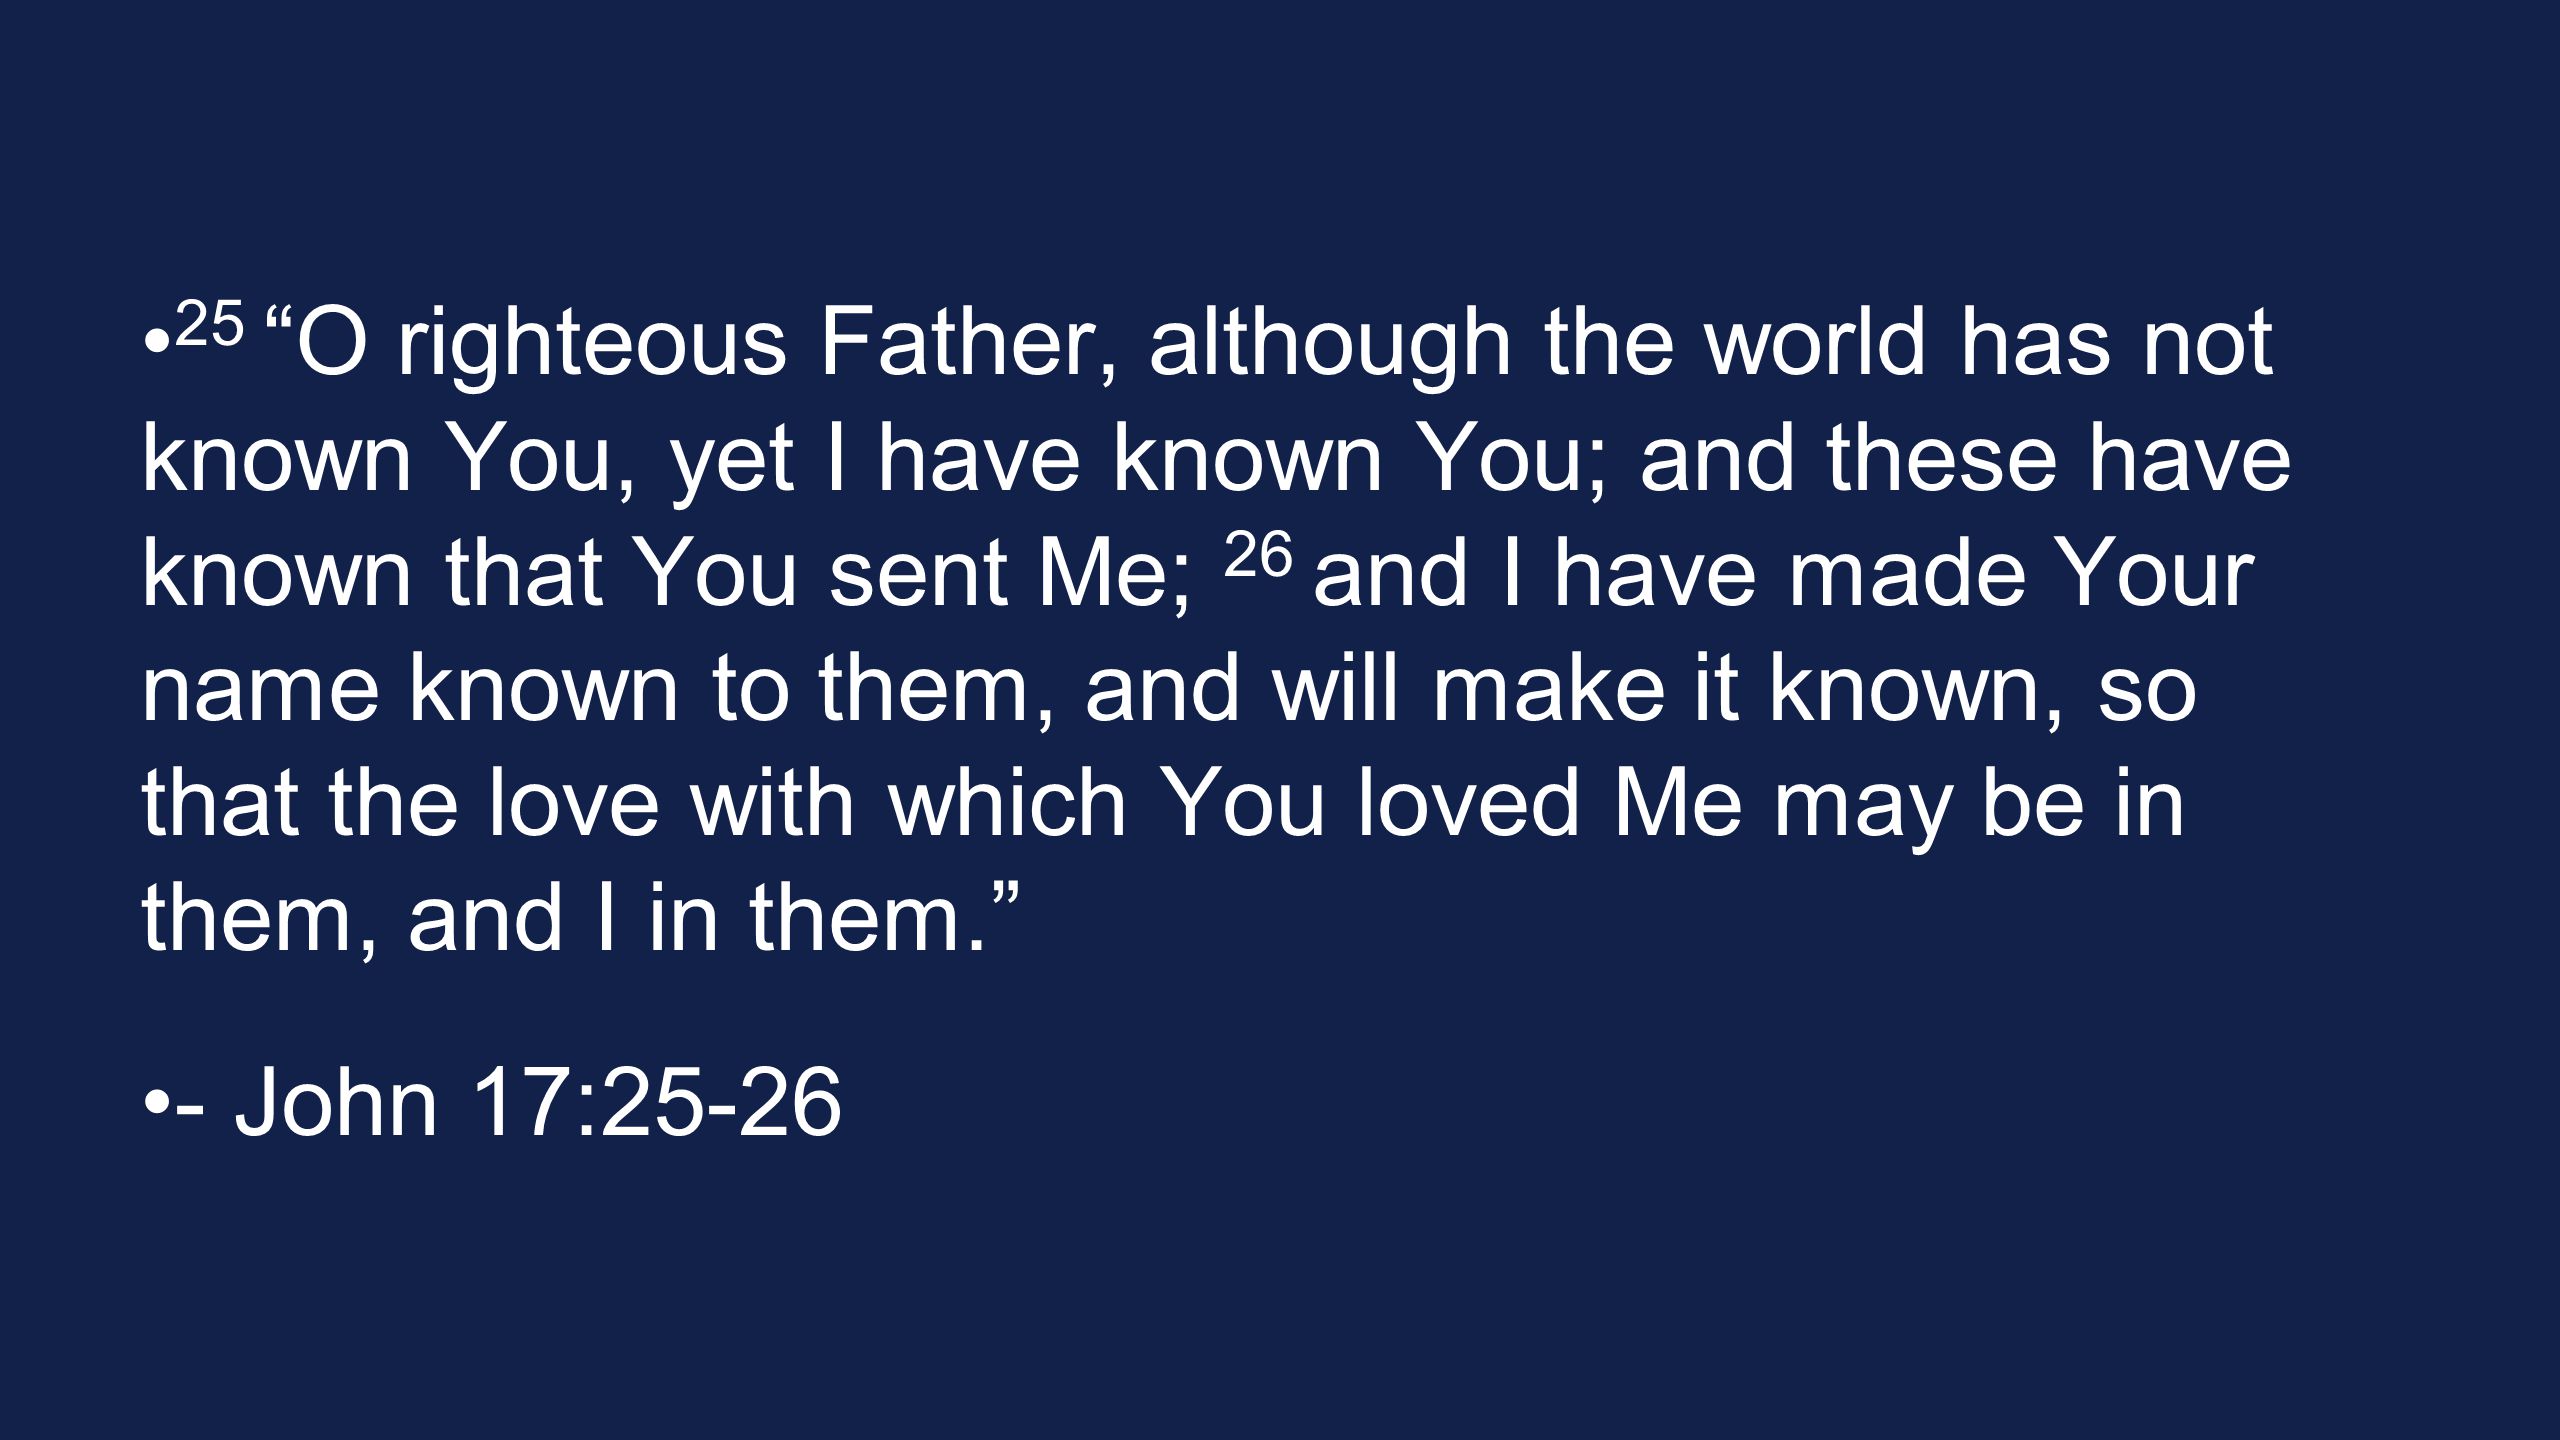 25 O righteous Father, although the world has not known You, yet I have known You; and these have known that You sent Me; 26 and I have made Your name known to them, and will make it known, so that the love with which You loved Me may be in them, and I in them.